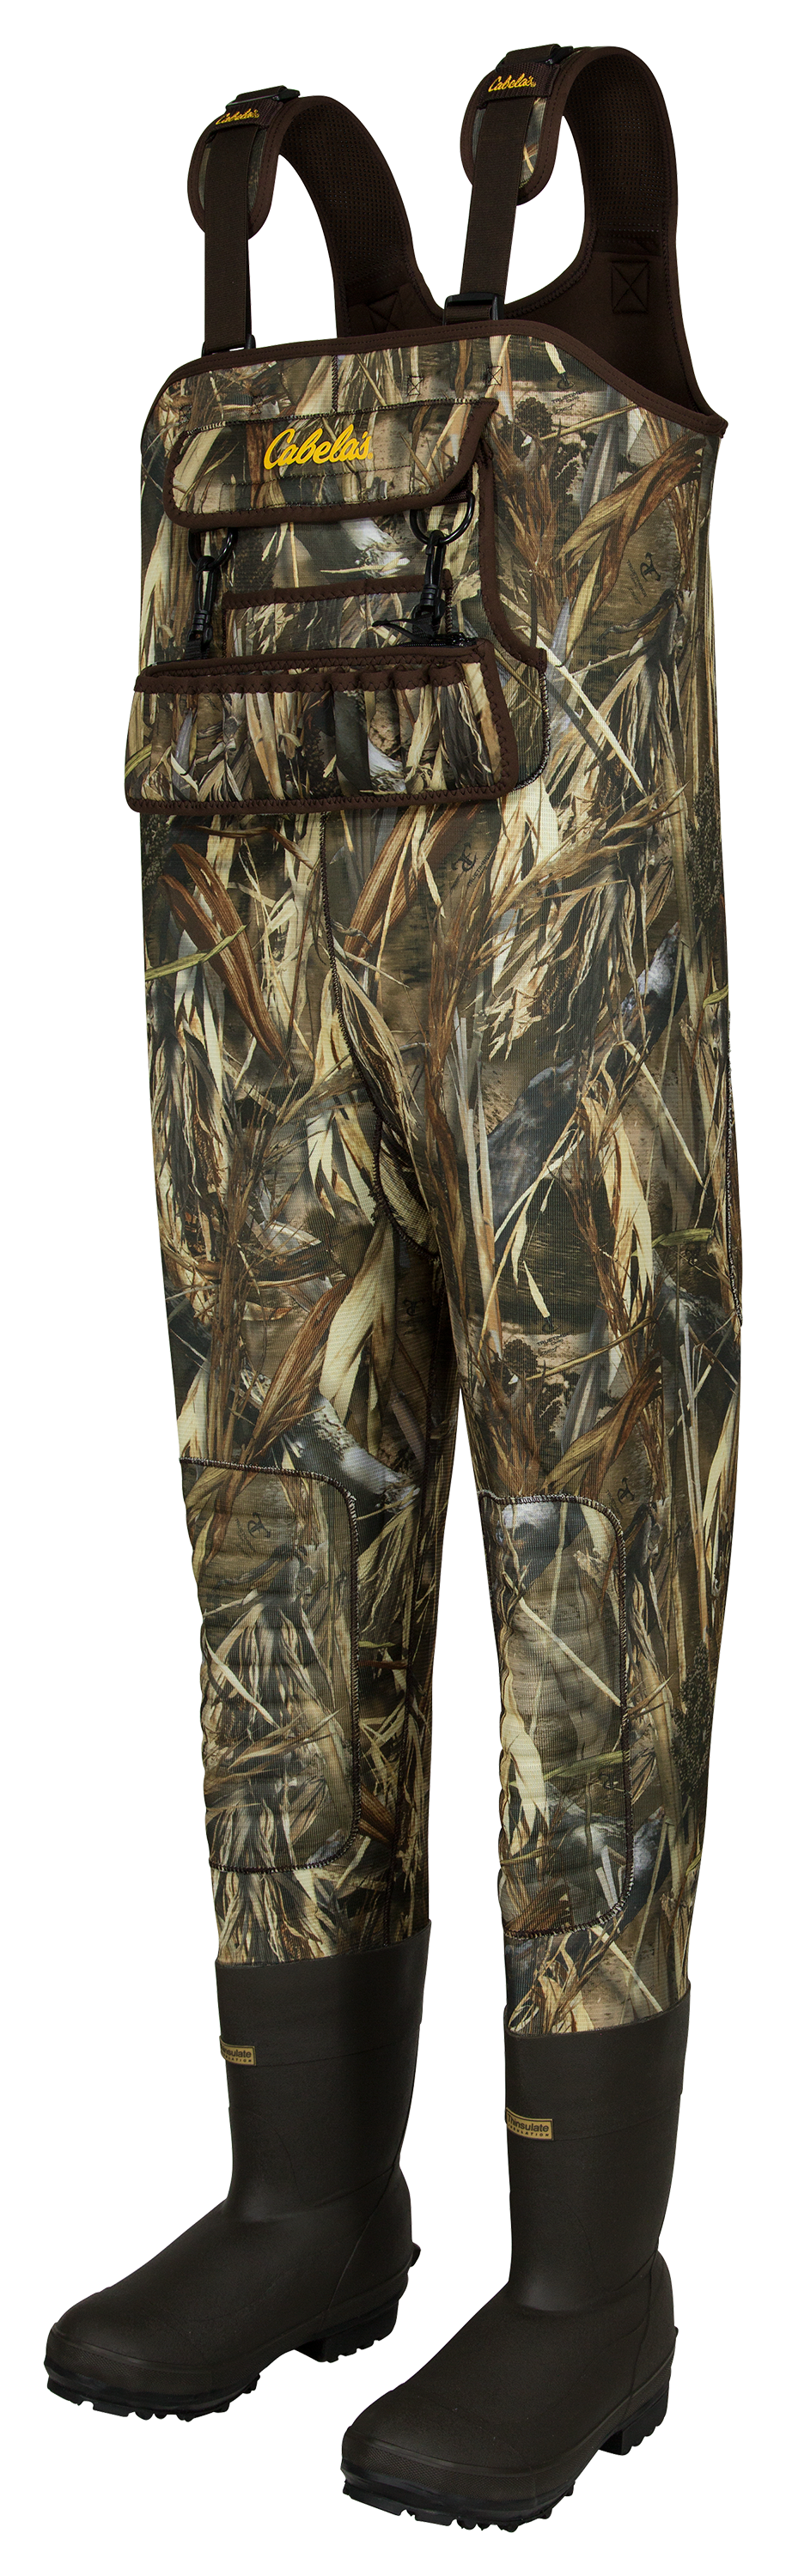 Cabelas CHEST Waders 11R SM1600-MAX4 SUPERMAG Mossy Oak DUCK Camo Neoprene